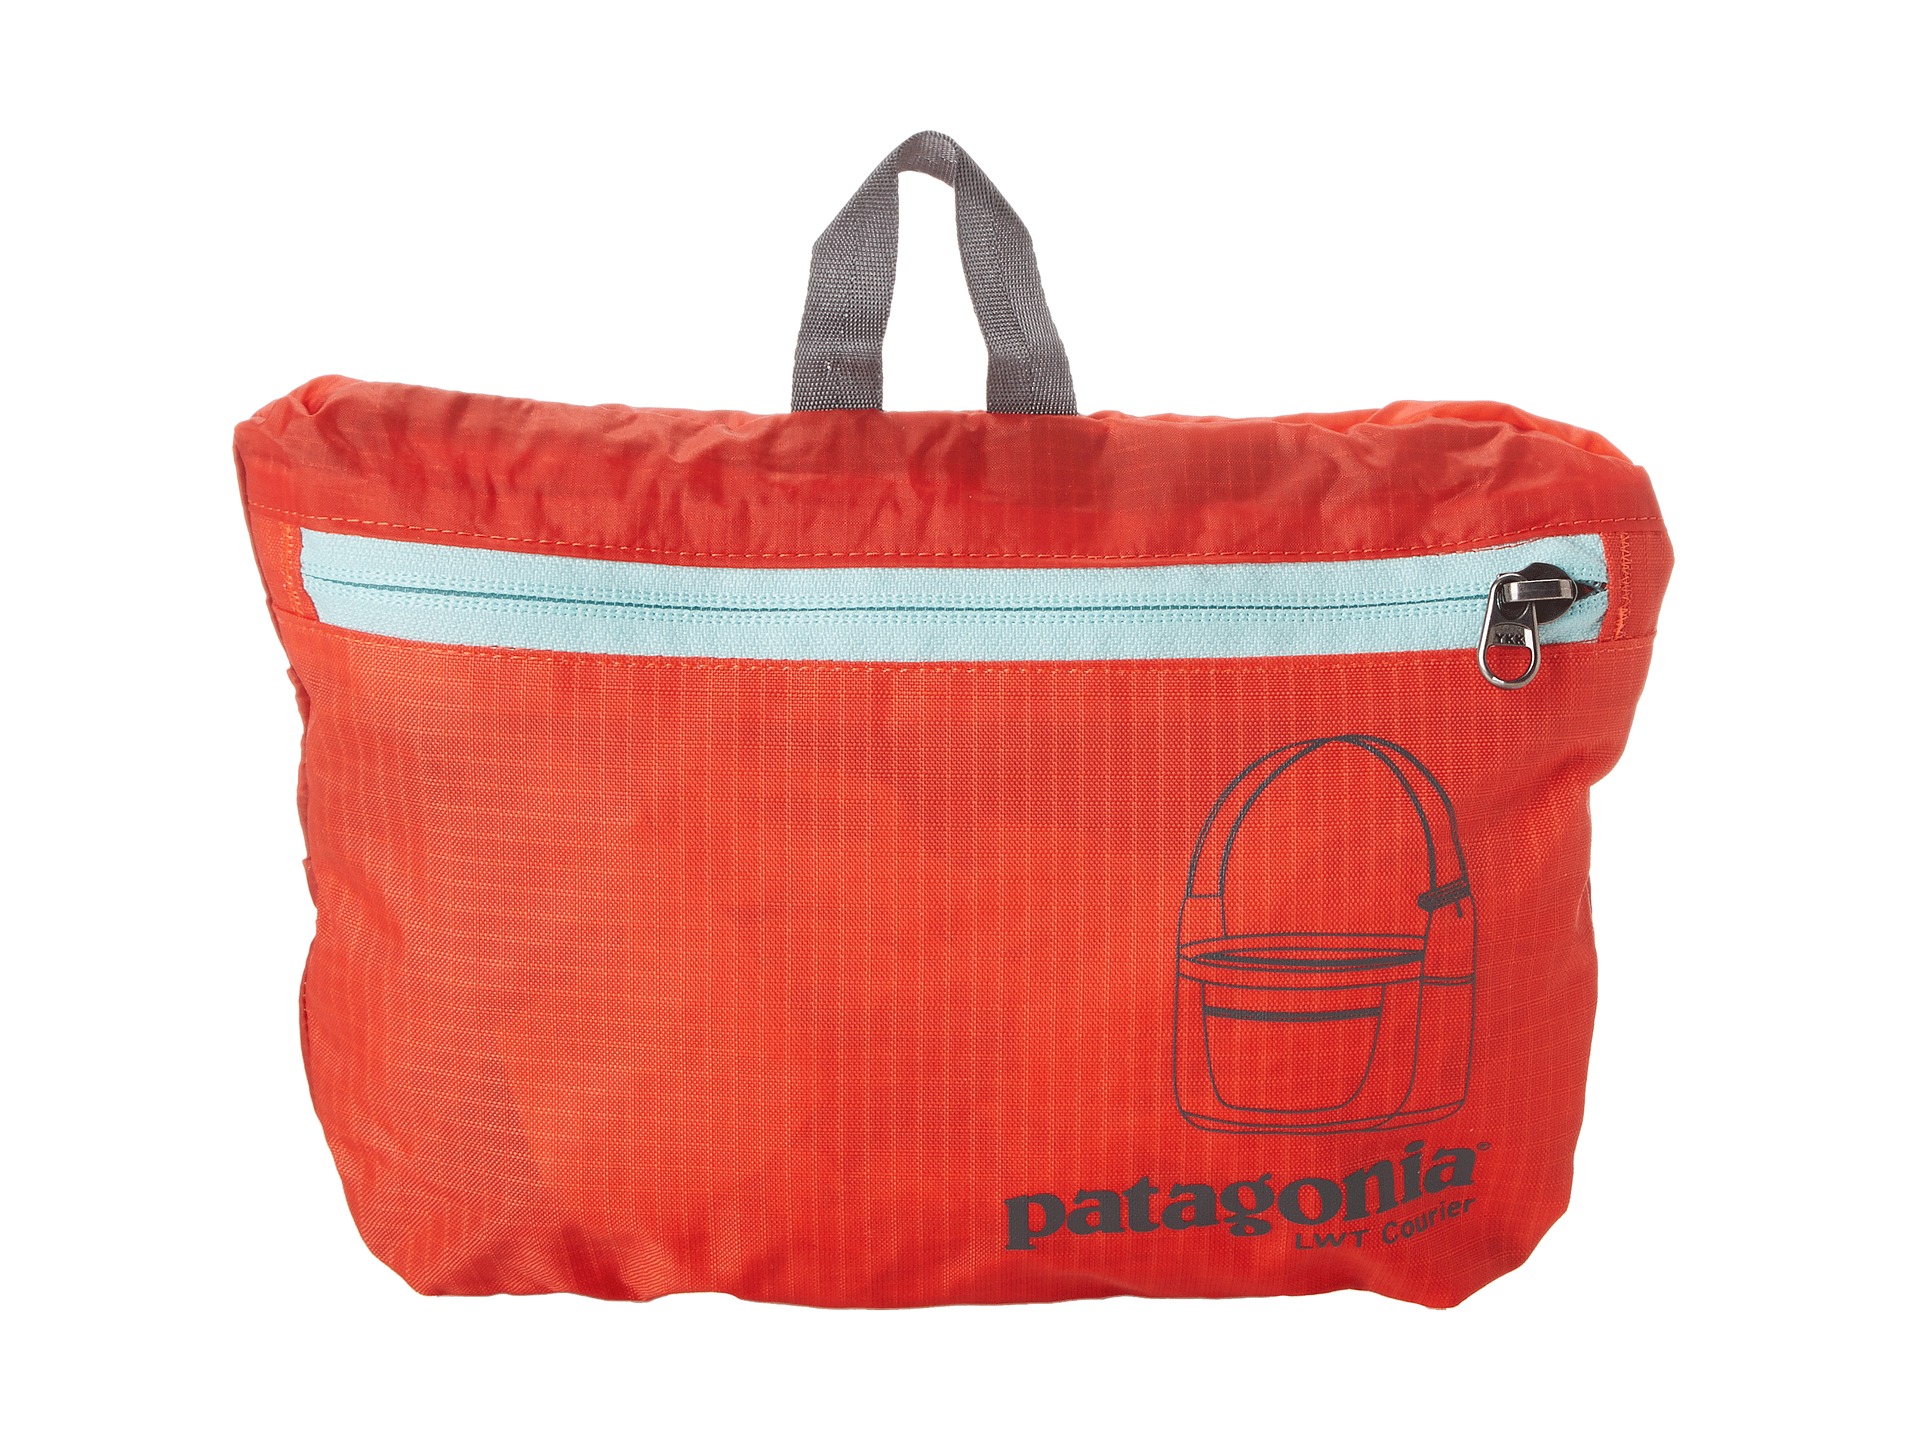 Patagonia Lightweight Travel Courier | Shipped Free at Zappos